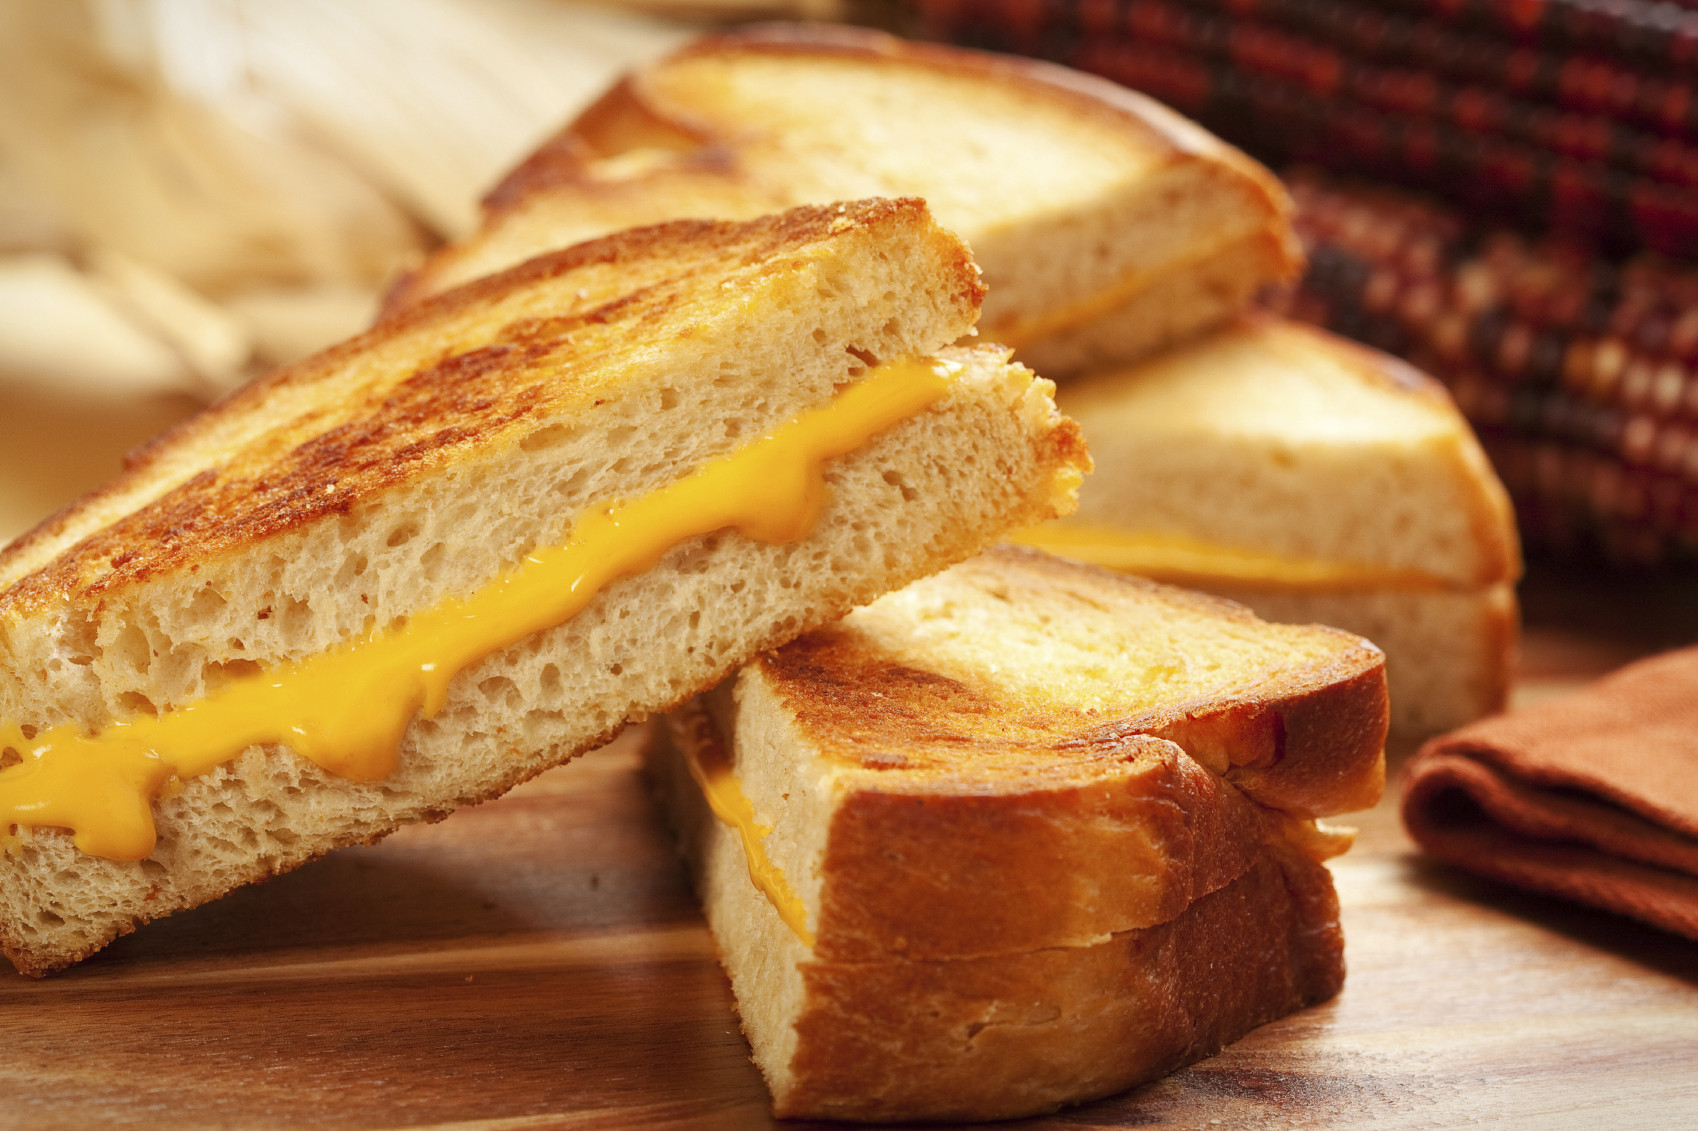 Food For Thought in Williamsburg chosen as 'best grilled cheese' in